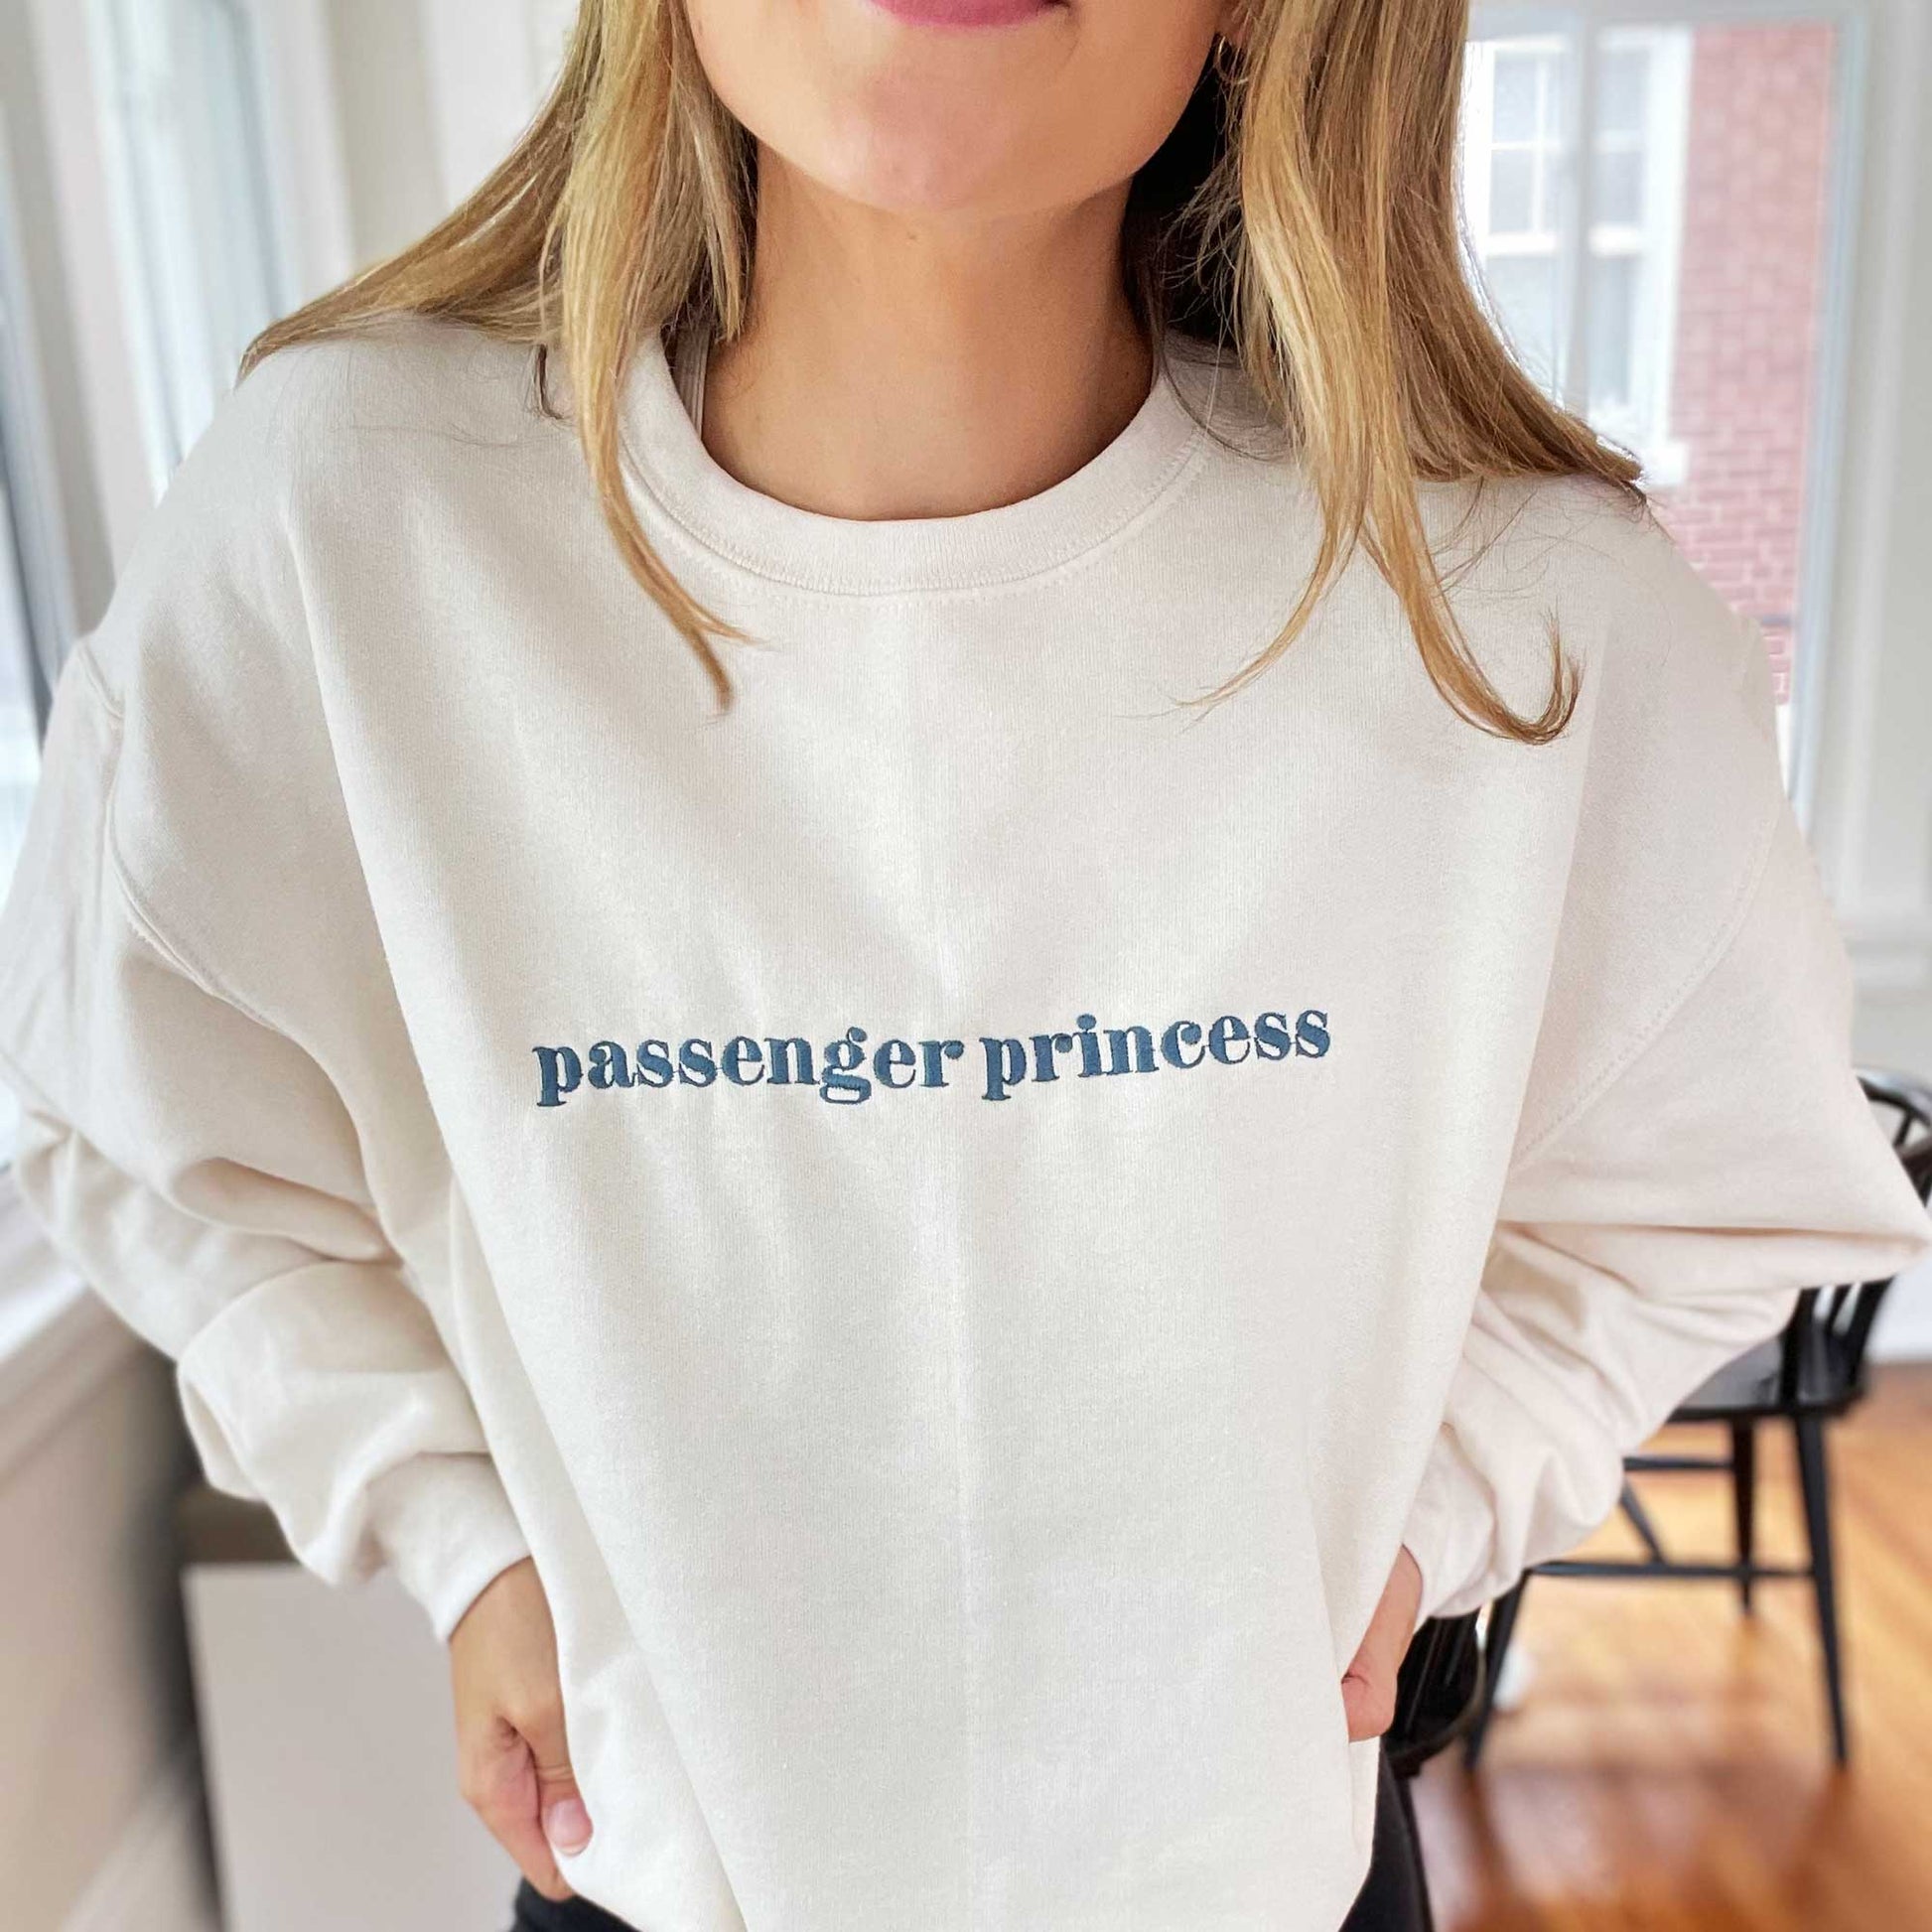 sweet cream crewneck sweatshirt with passenger princess embroidered in french blue thread